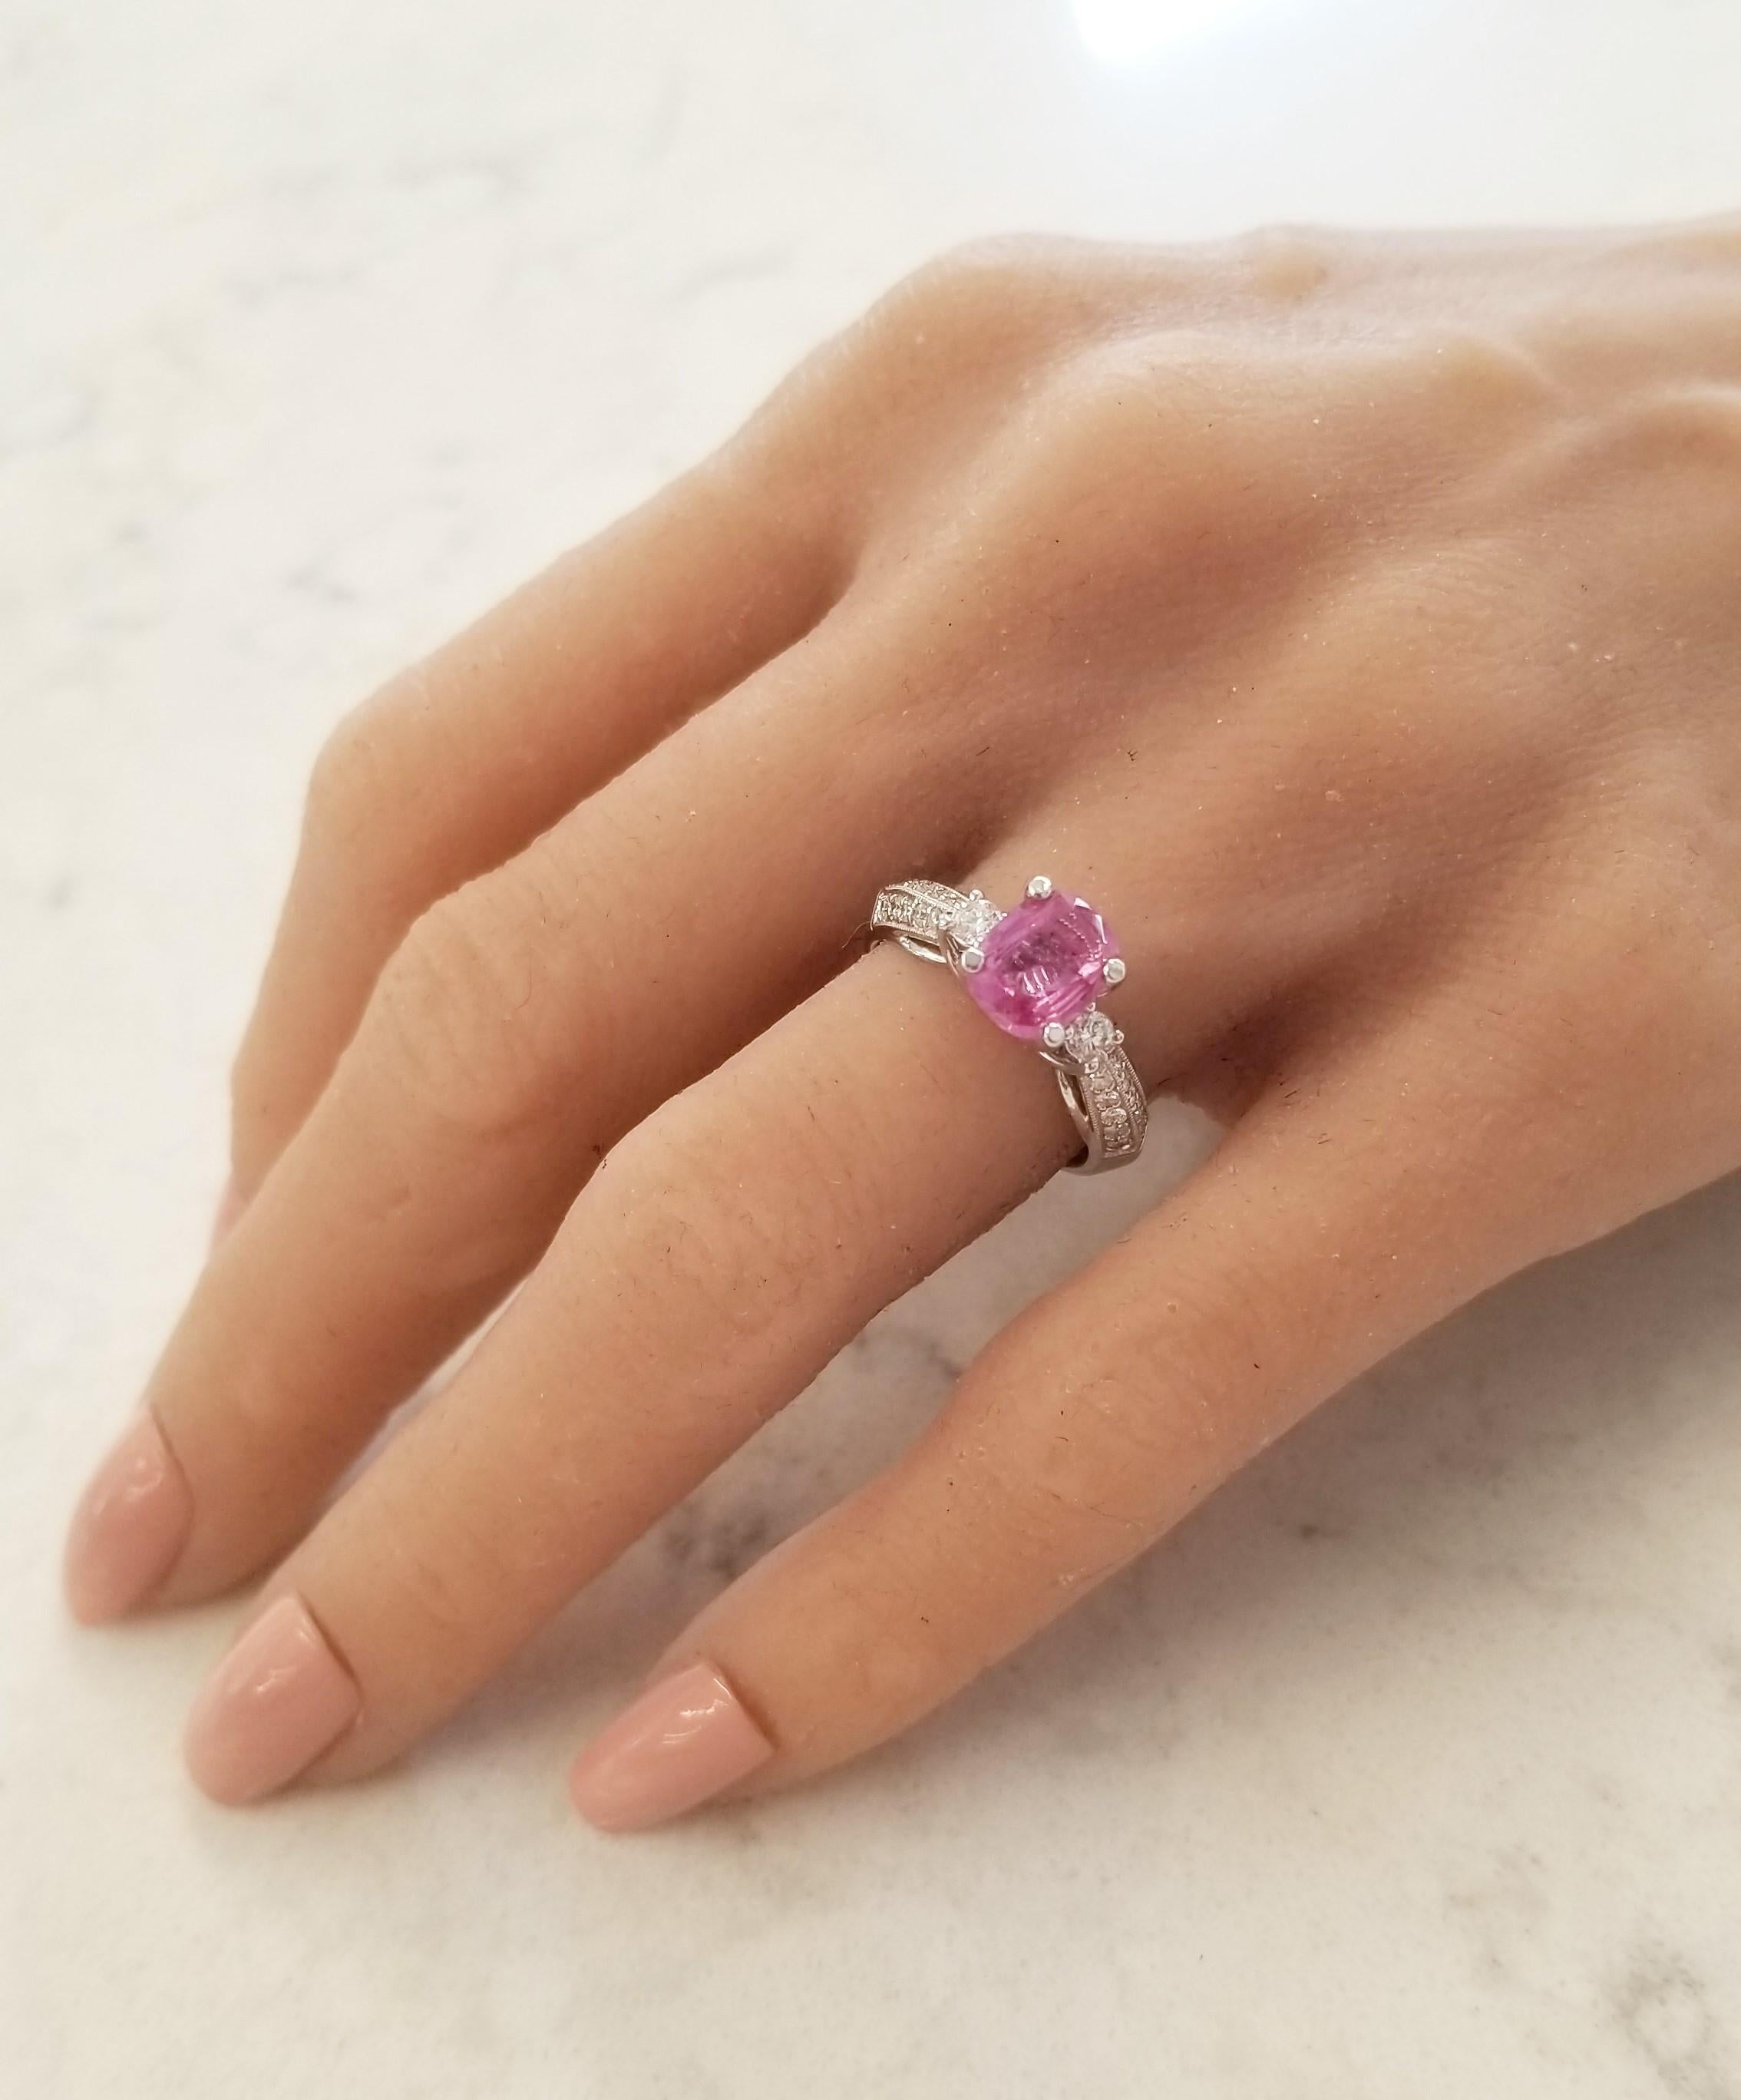 This striking piece features a shimmering 1.57 carat oval pink sapphire set into a secure four prong mounting. Its origin is Sri Lanka, its color is intense pink with excellent luster, transparency, and clarity. The sapphire has a brilliant round